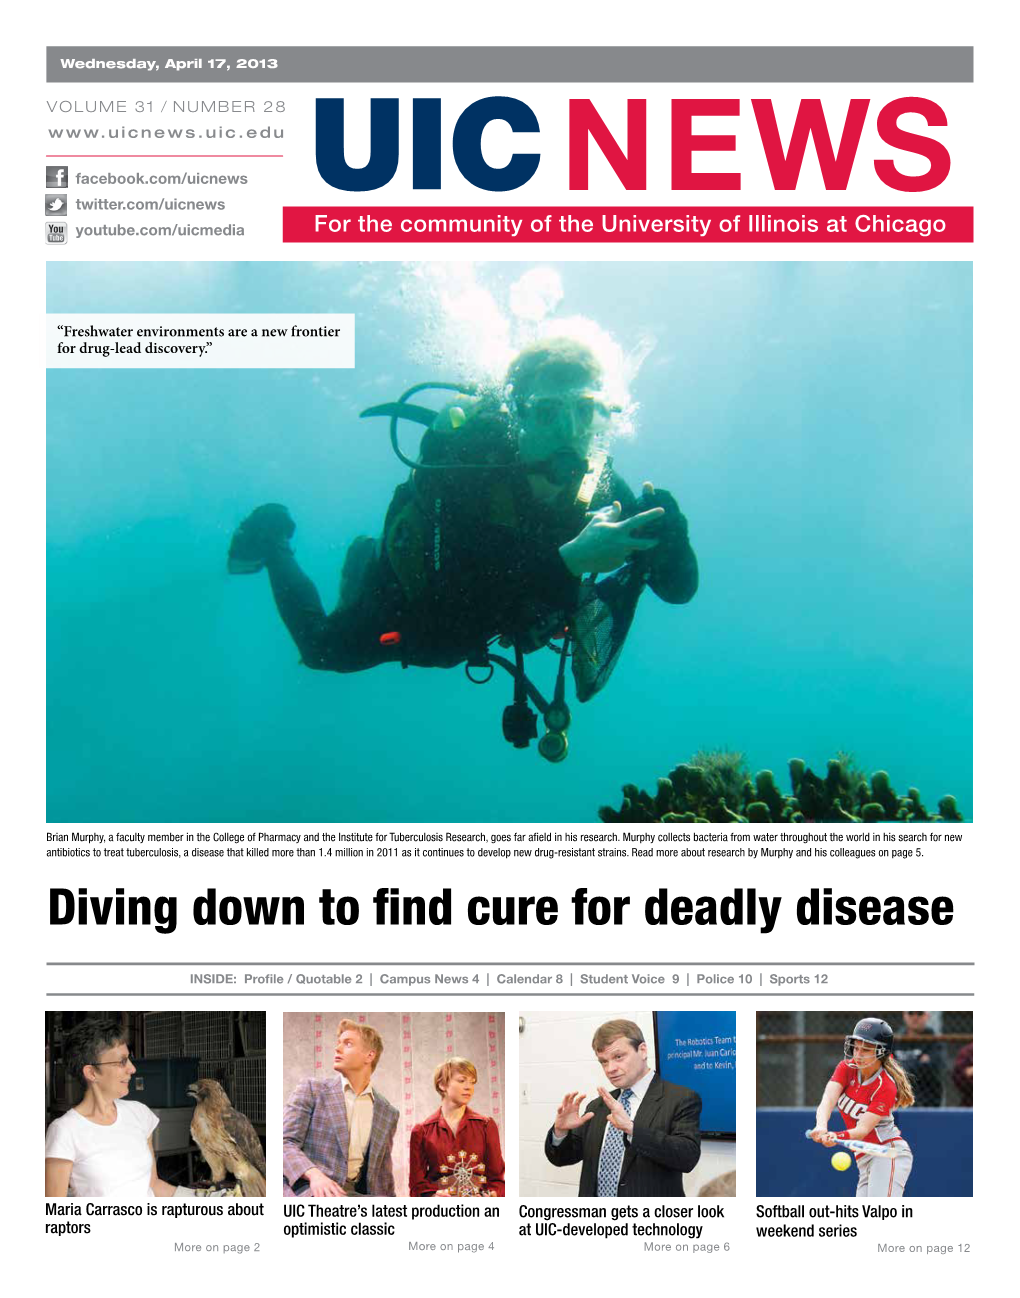 Diving Down to Find Cure for Deadly Disease